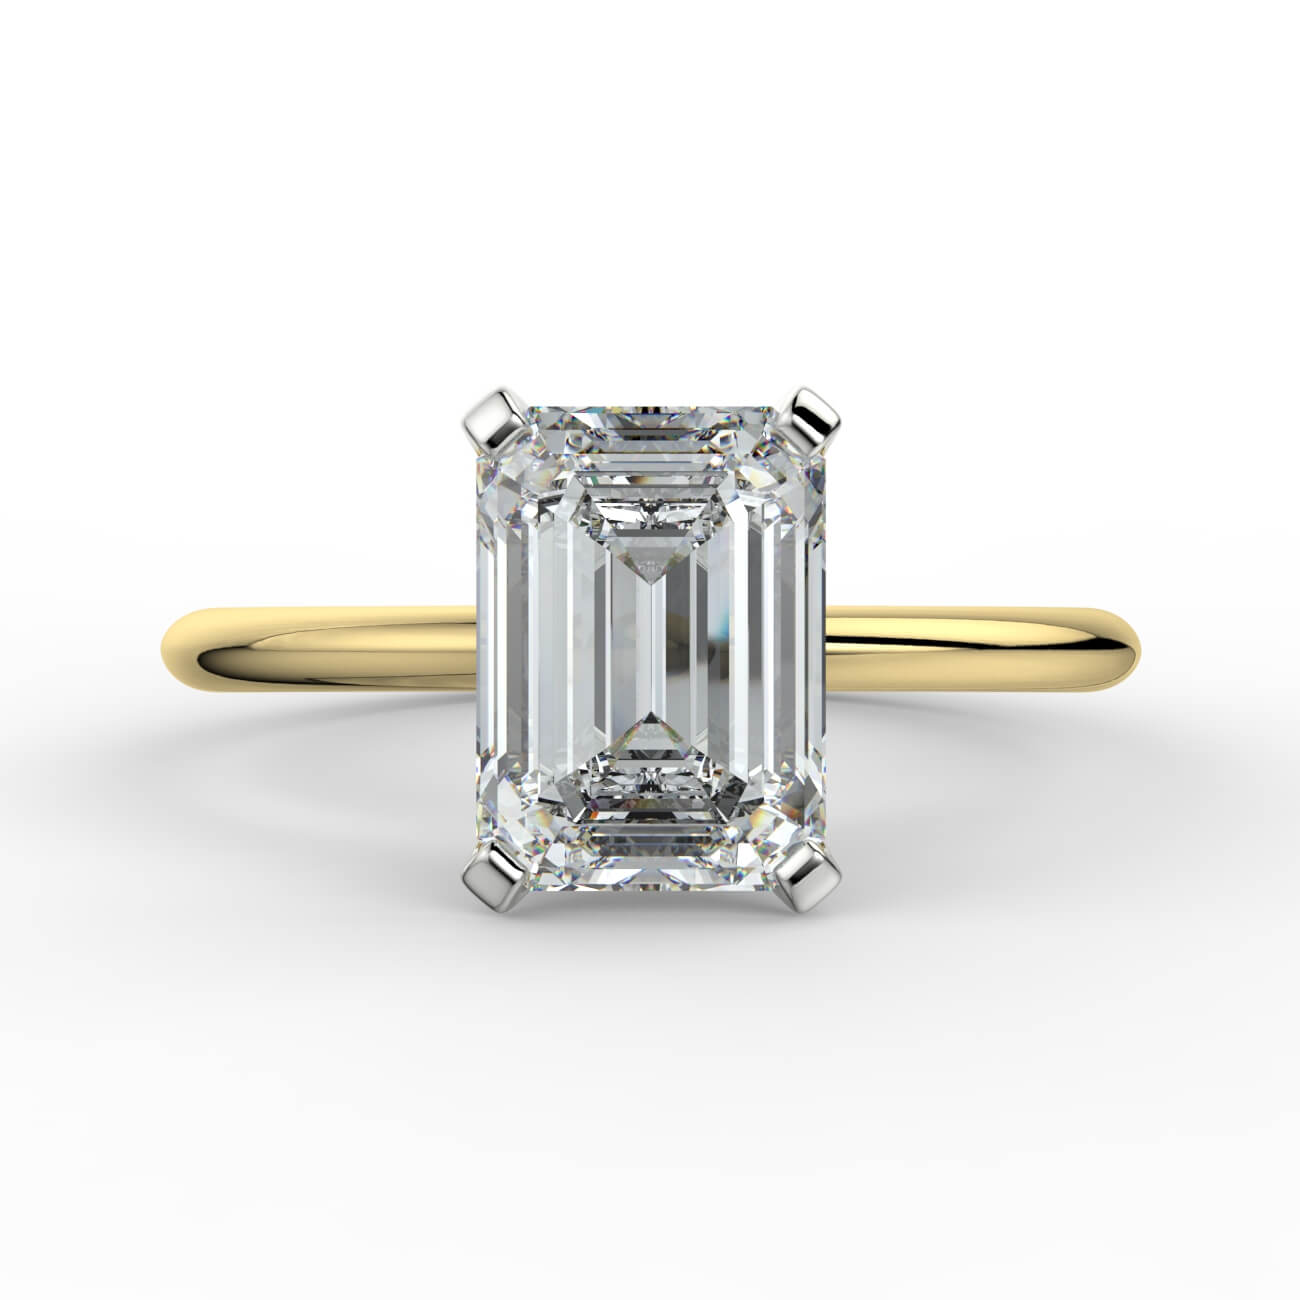 Knife-edge solitaire emerald cut diamond engagement ring in white and yellow gold – Australian Diamond Network